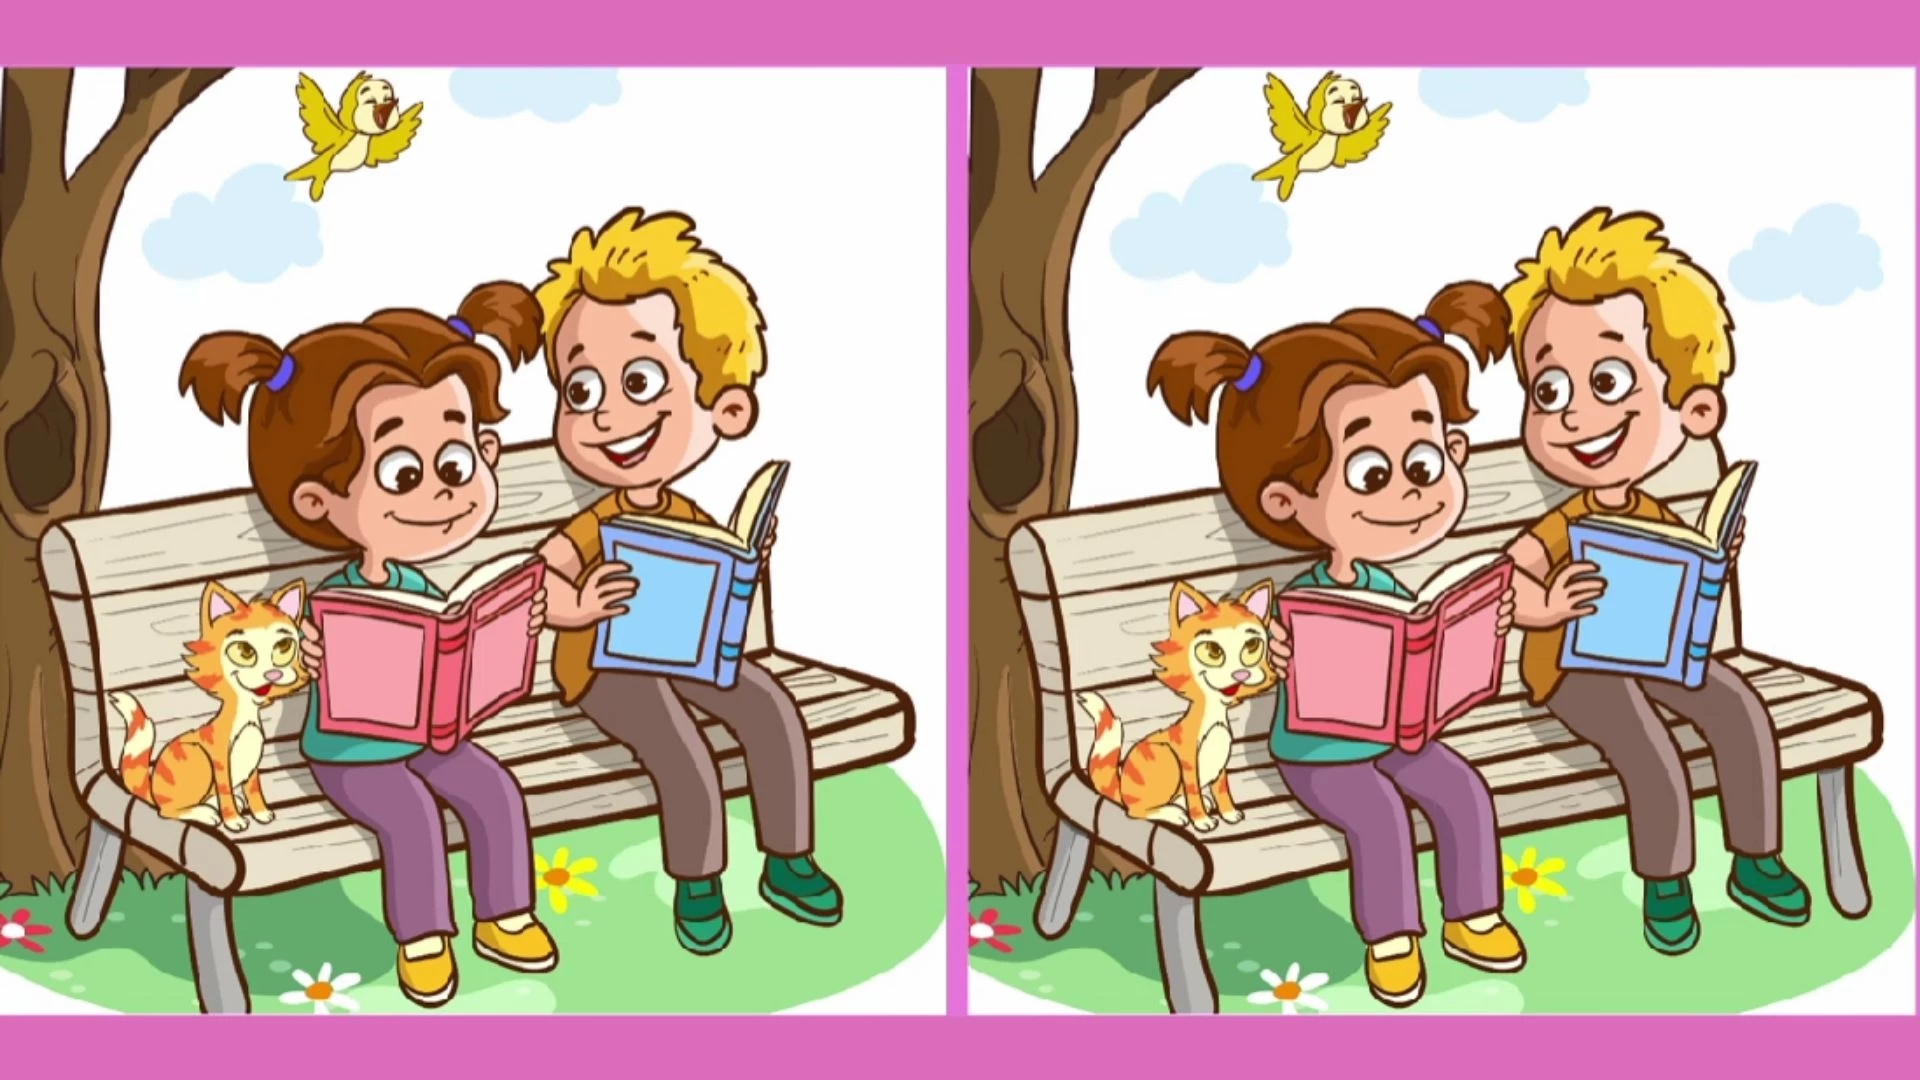 Only Extra Sharp eyes can spot 3 differences in Children's Park picture within 10 seconds